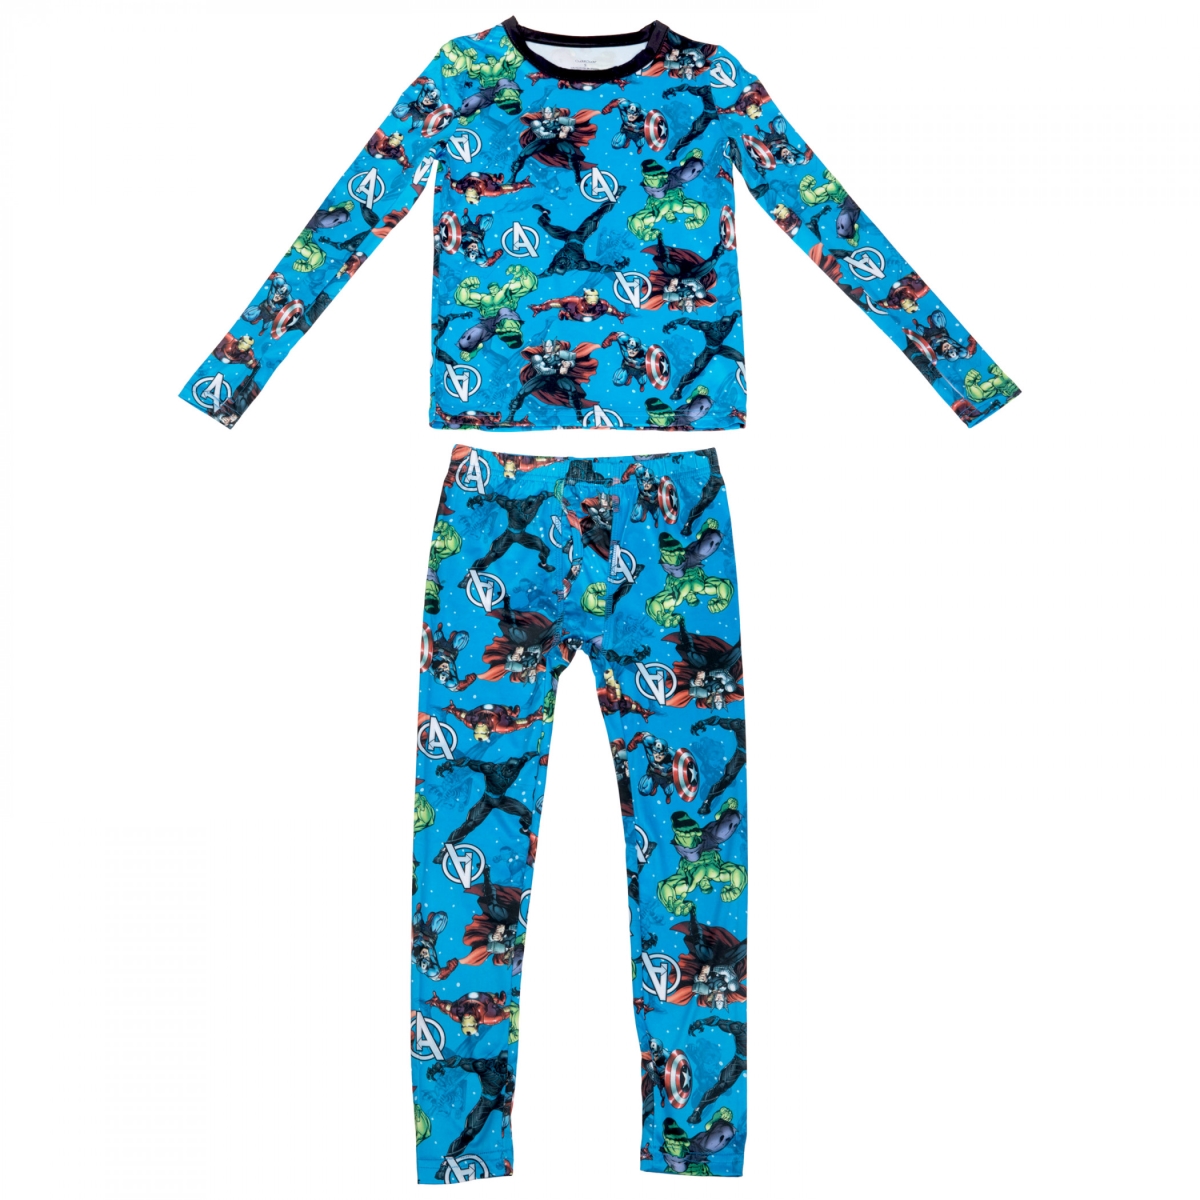 Picture of Avengers 846000-mall-5-6 Marvel Comics the Avengers Mightiest Heroes Boys Pajama Set - Extra Small - 5-6 - 2 Piece